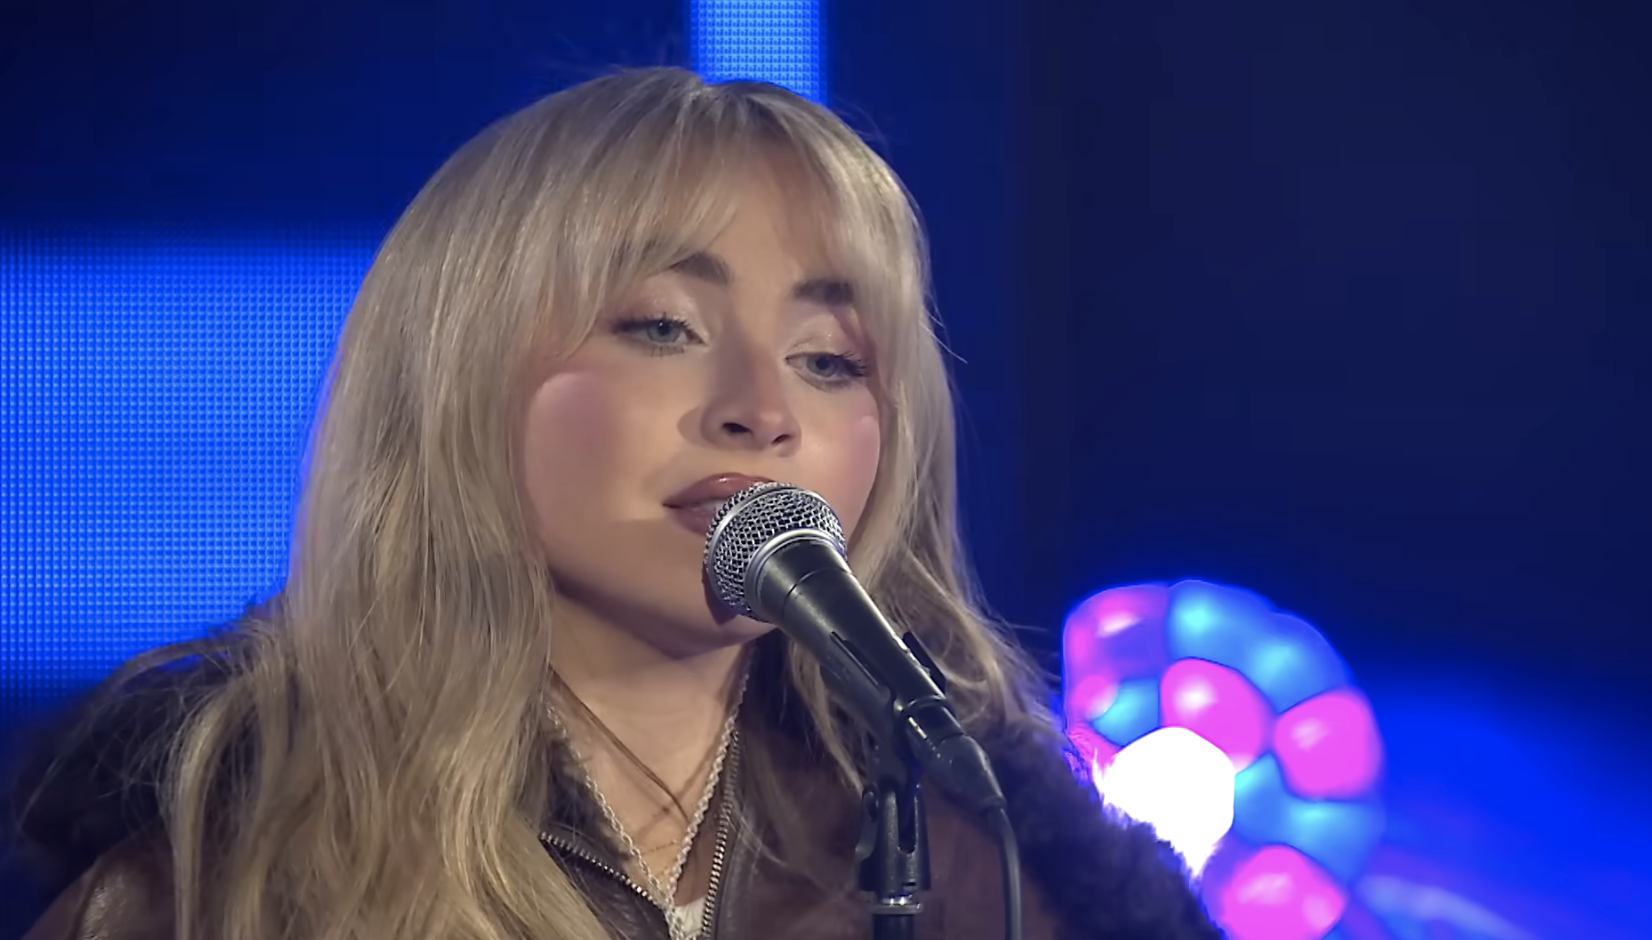 Close-up of Sabrina singing into a microphone